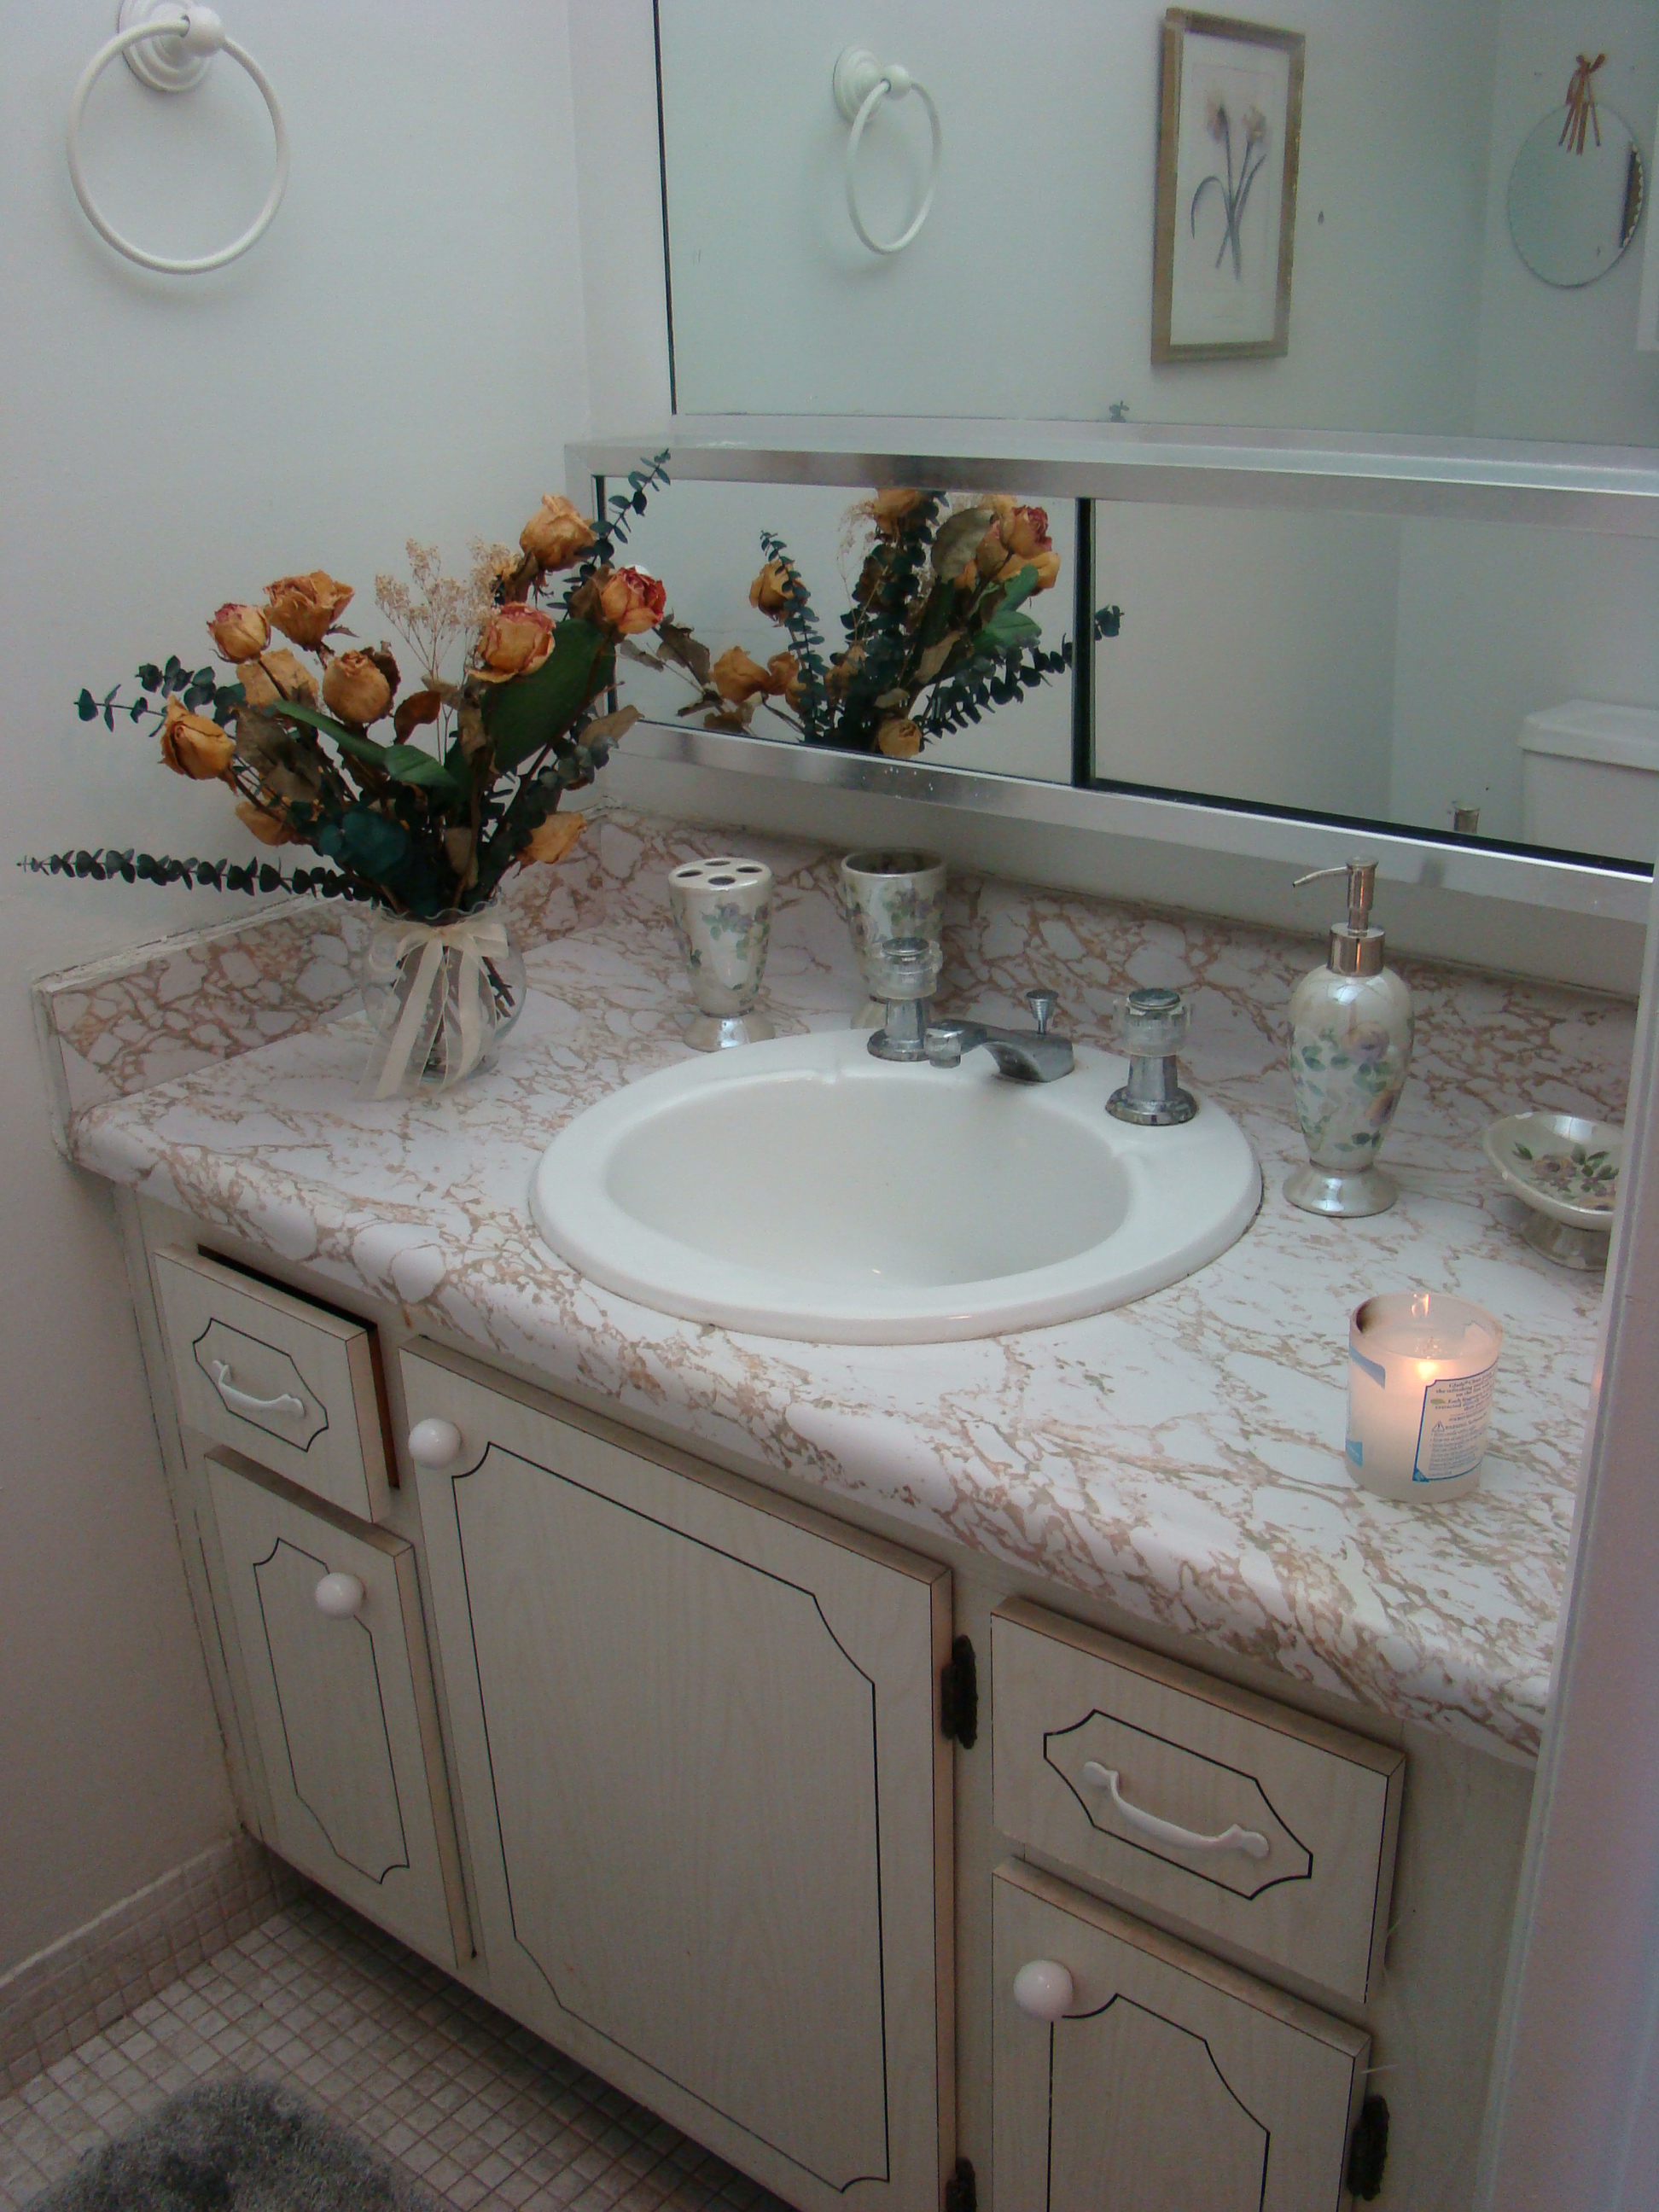 Coconut Grove One Bedroom Guest Bathroom Decorating Ideas title=